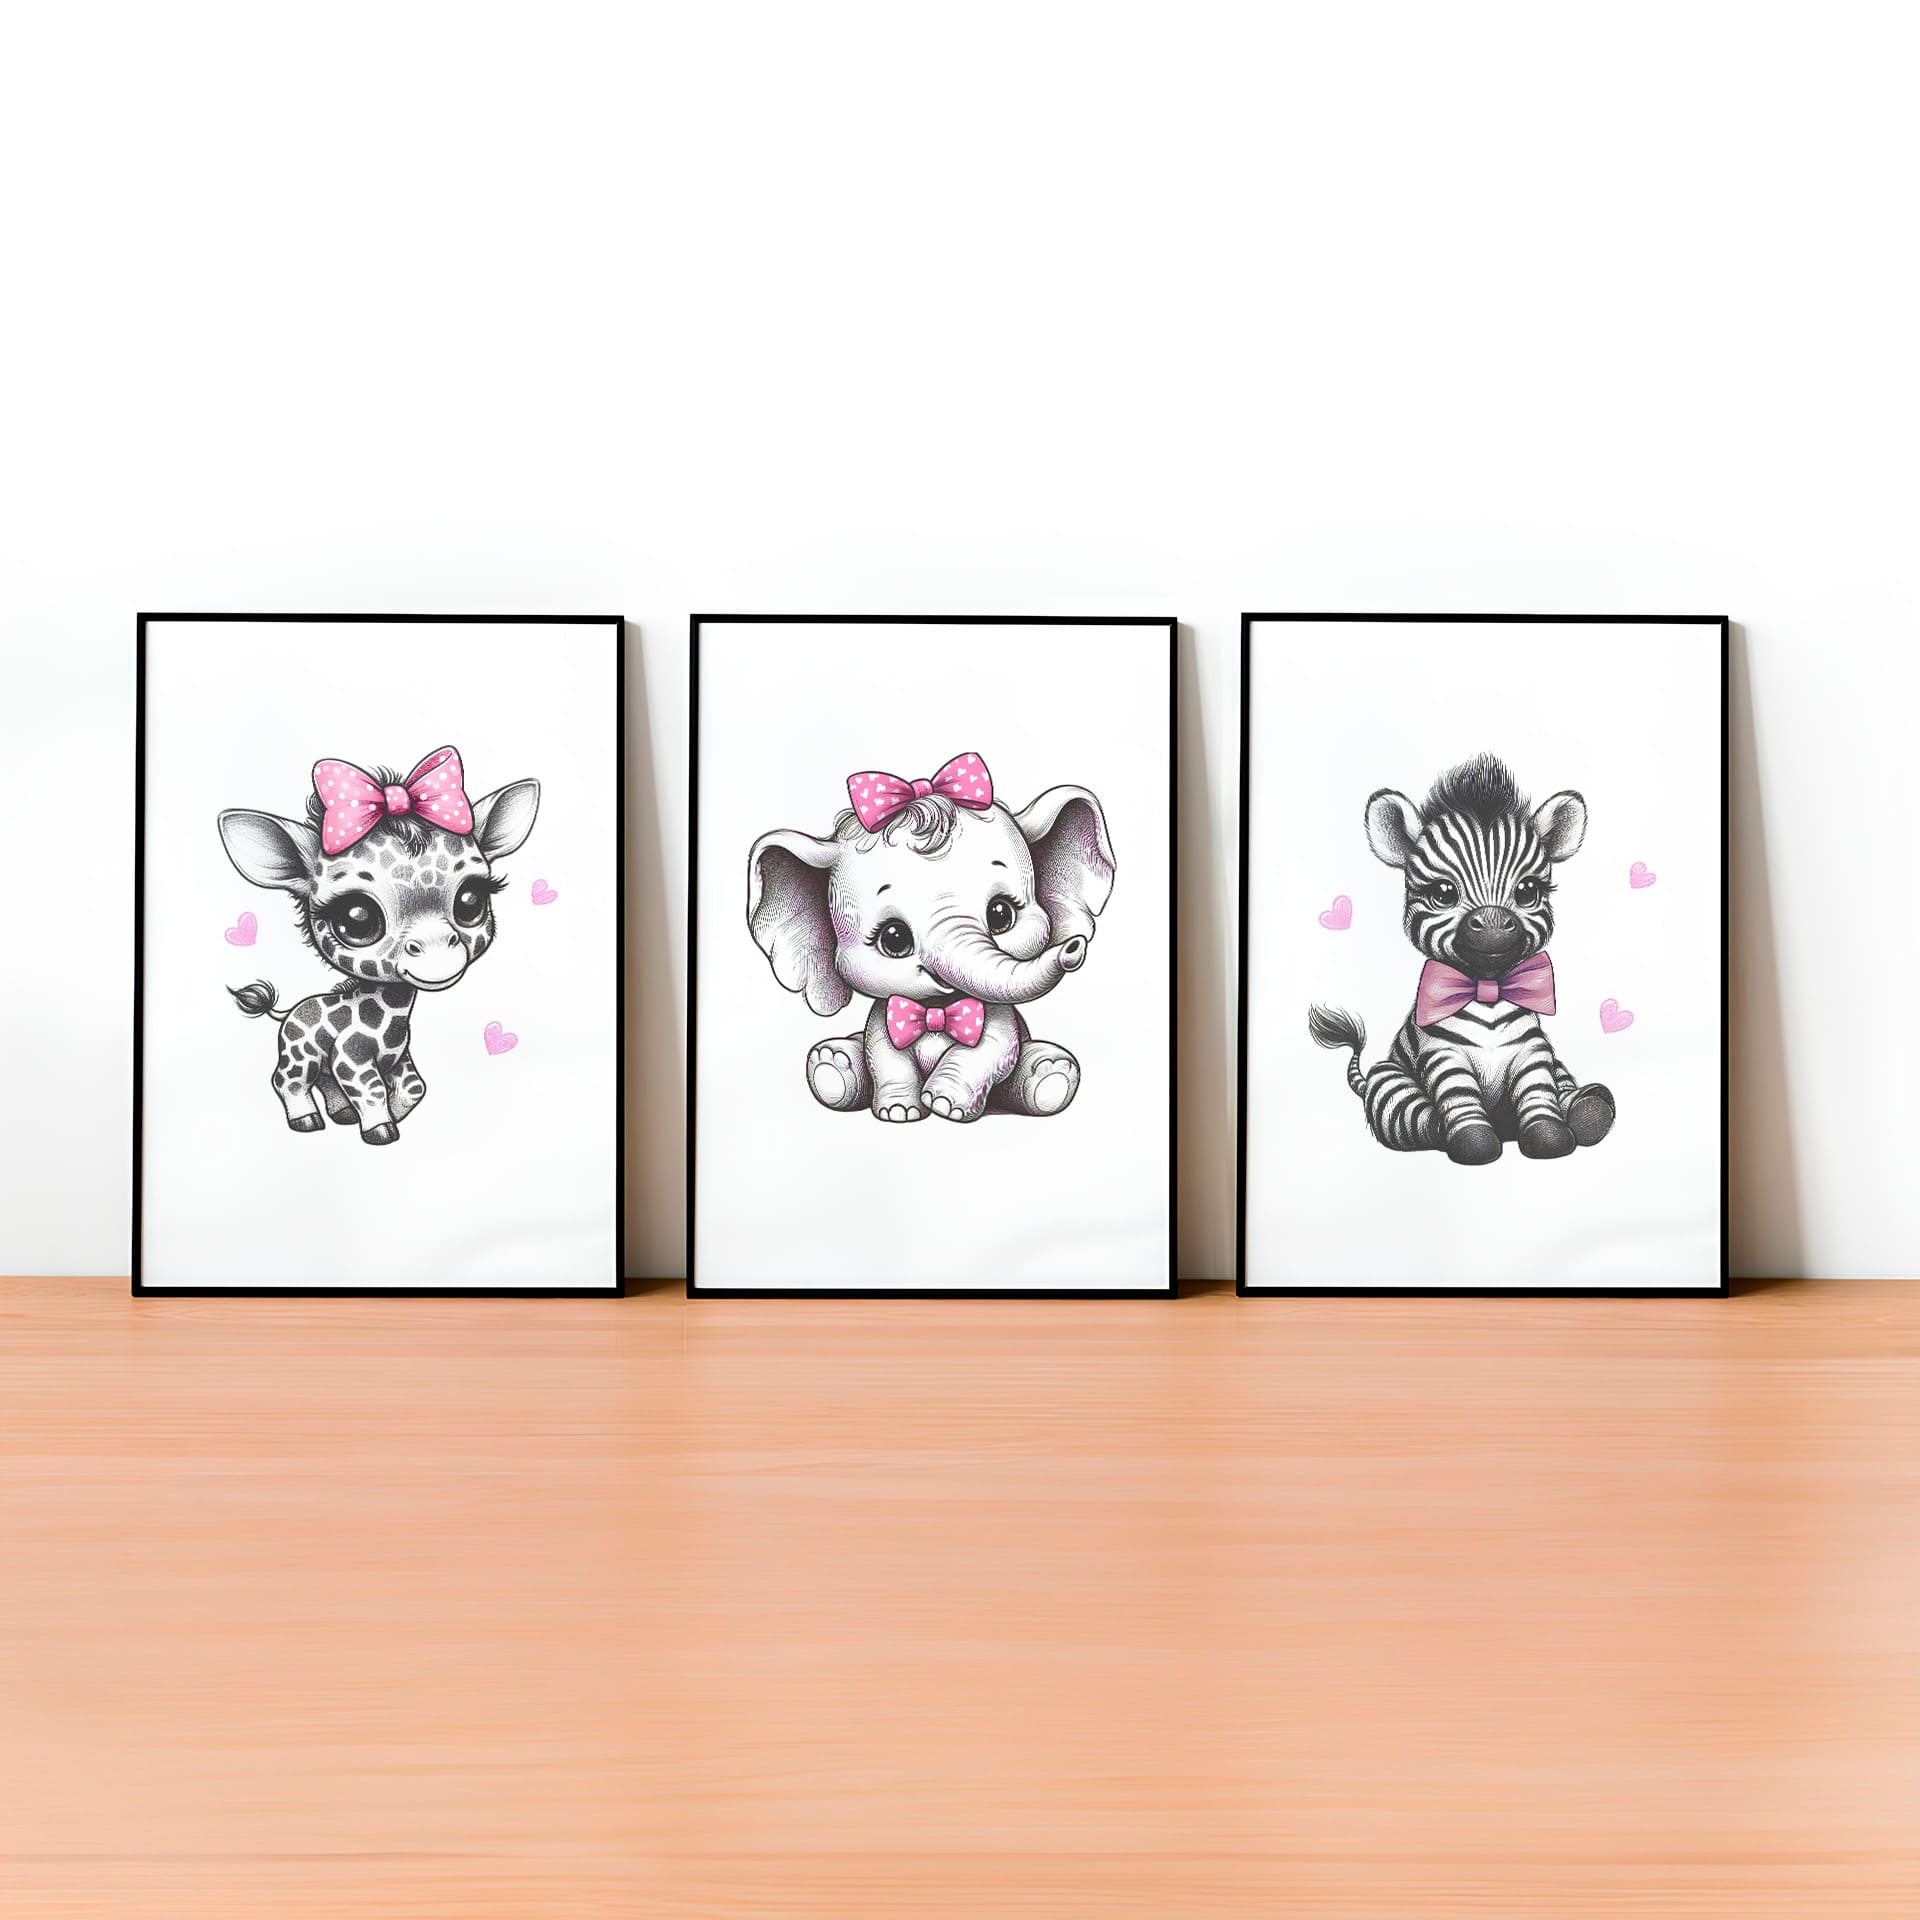 Set of three A4 prints in the style of pencil drawings. Each print features a cartoon baby giraffe, baby elephant, and baby zebra in black and white. They all wear a pink bow, with a few small pink hearts in the background.